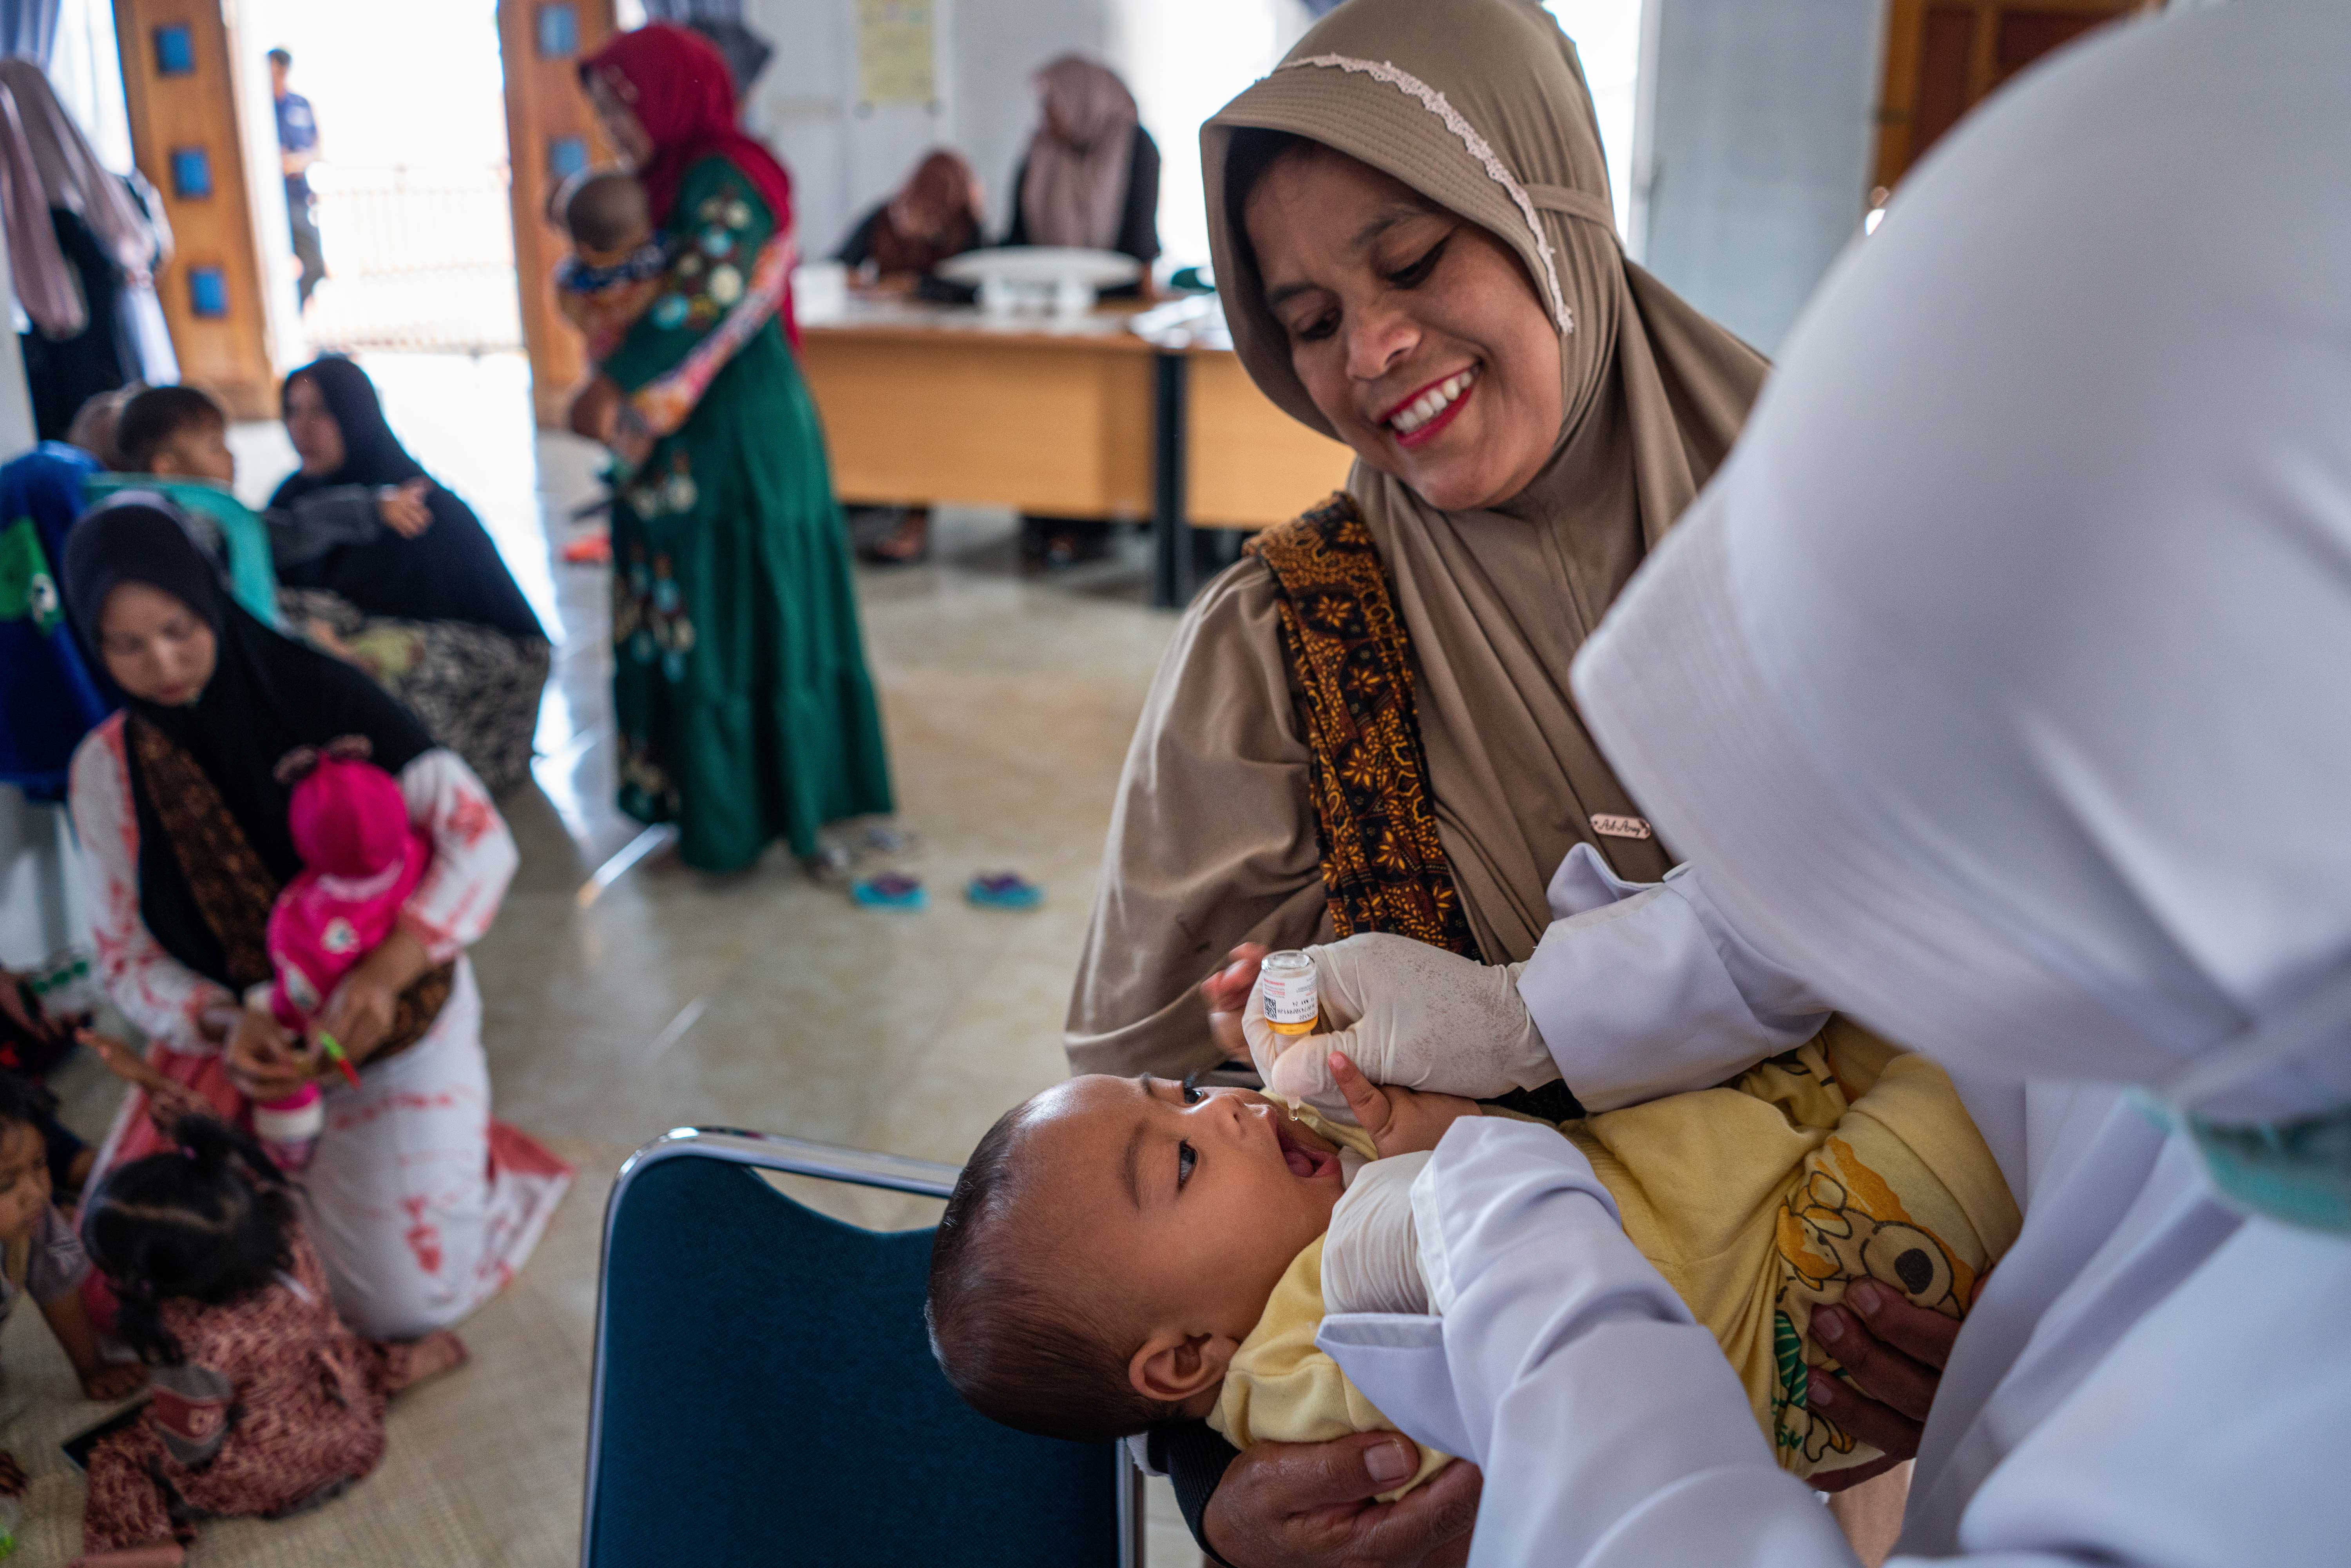 A health professional is administering an oral vaccine or medication to a baby, who is being held by a smiling woman, likely the mother.